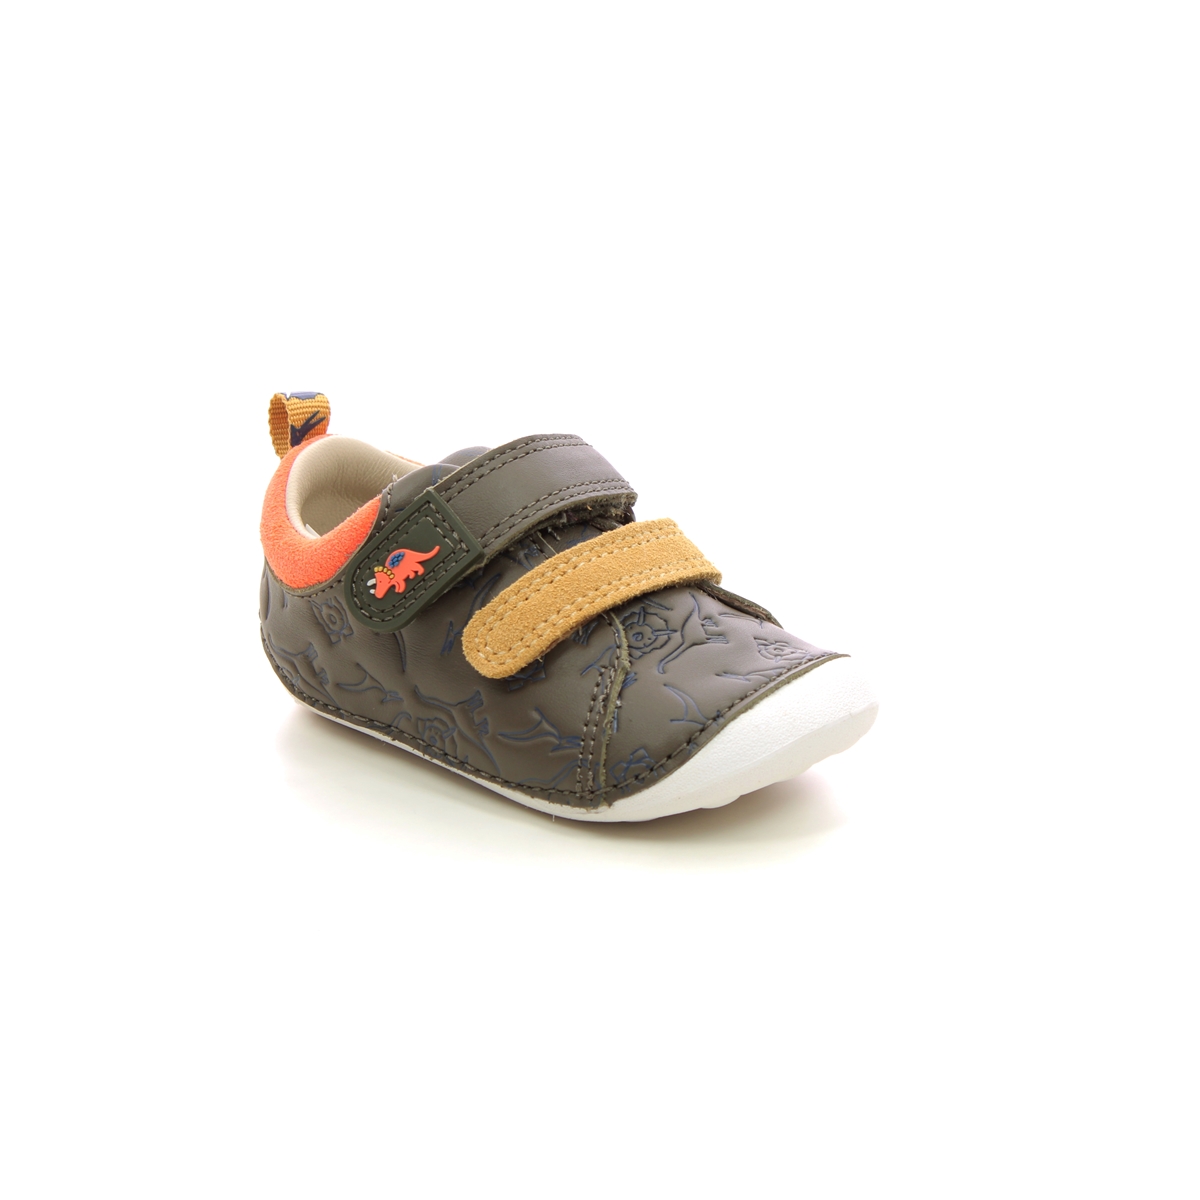 Clarks Tiny Rex T Khaki Leather Kids Boys First Shoes 7229-66F in a Plain Leather in Size 5